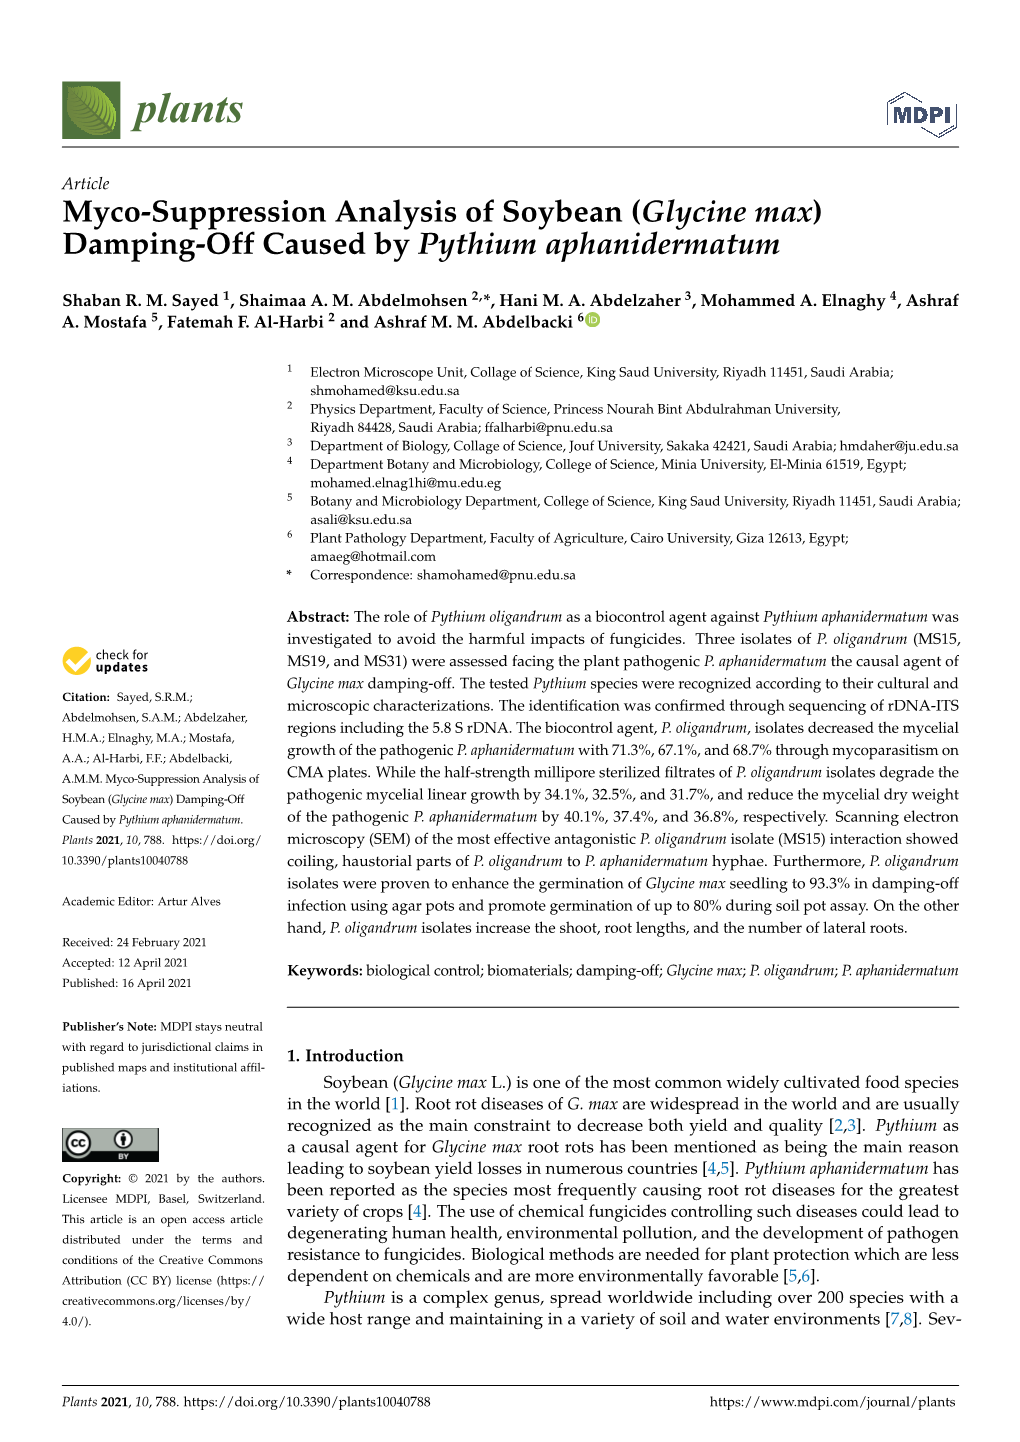 Myco-Suppression Analysis of Soybean (Glycine Max) Damping-Off Caused by Pythium Aphanidermatum